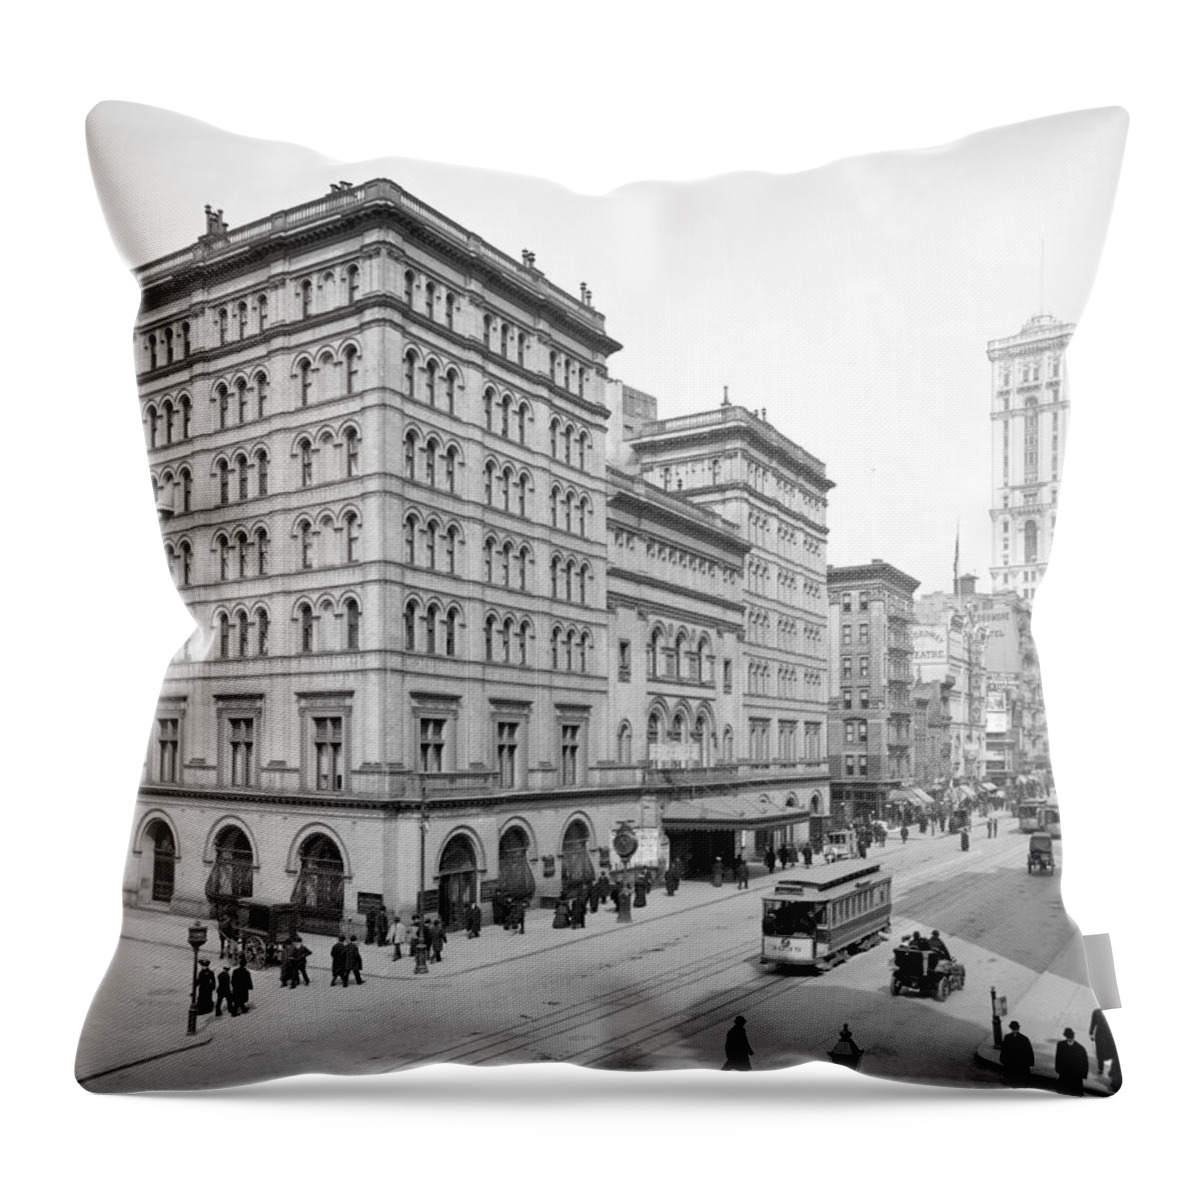 Entertainment Throw Pillow featuring the photograph Nyc, Metropolitan Opera House, 1905 by Science Source